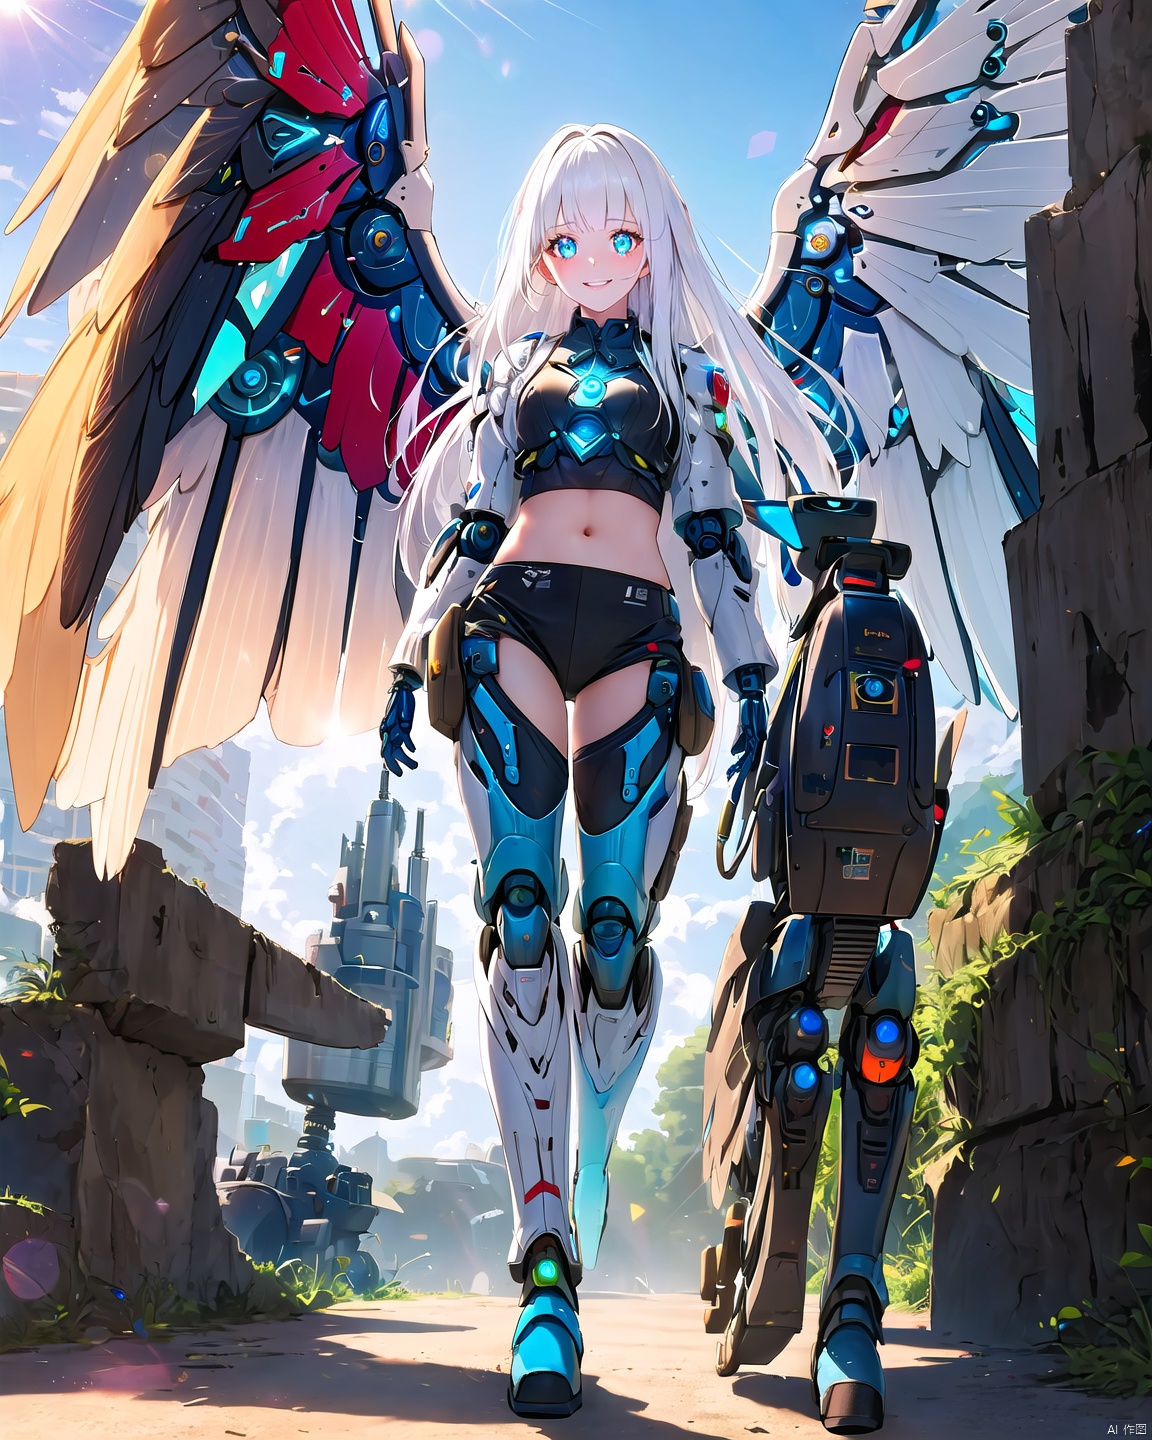 1 18-year-old beautiful girl +(detailed face)+ white hair + long hair + bangs + sunny and cheerful + blue pupils + mechanical legs + boots + wings Apocalyptic + sci-fi mechanical wings with fan +More details + color + lens flare,<lora:EMS-273028-EMS:1.000000>